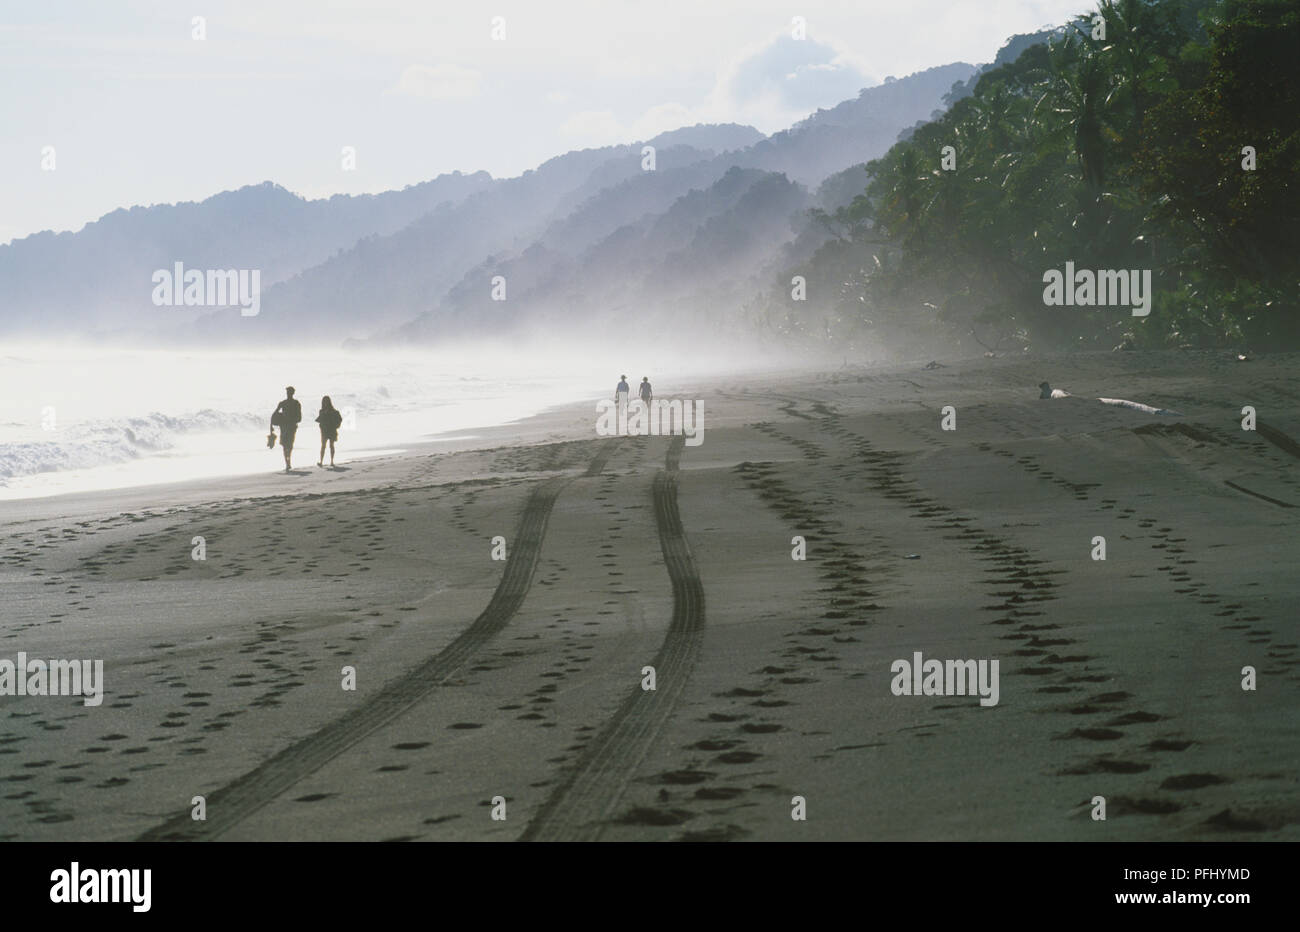 Central America, Costa Rica, Southern Zone, Peninsula de Osa, Parque Nacional Corcovado, couples walking, and waves crashing over wet sand beach indented with hoof prints and cart tracks on way from Carate in national park Stock Photo